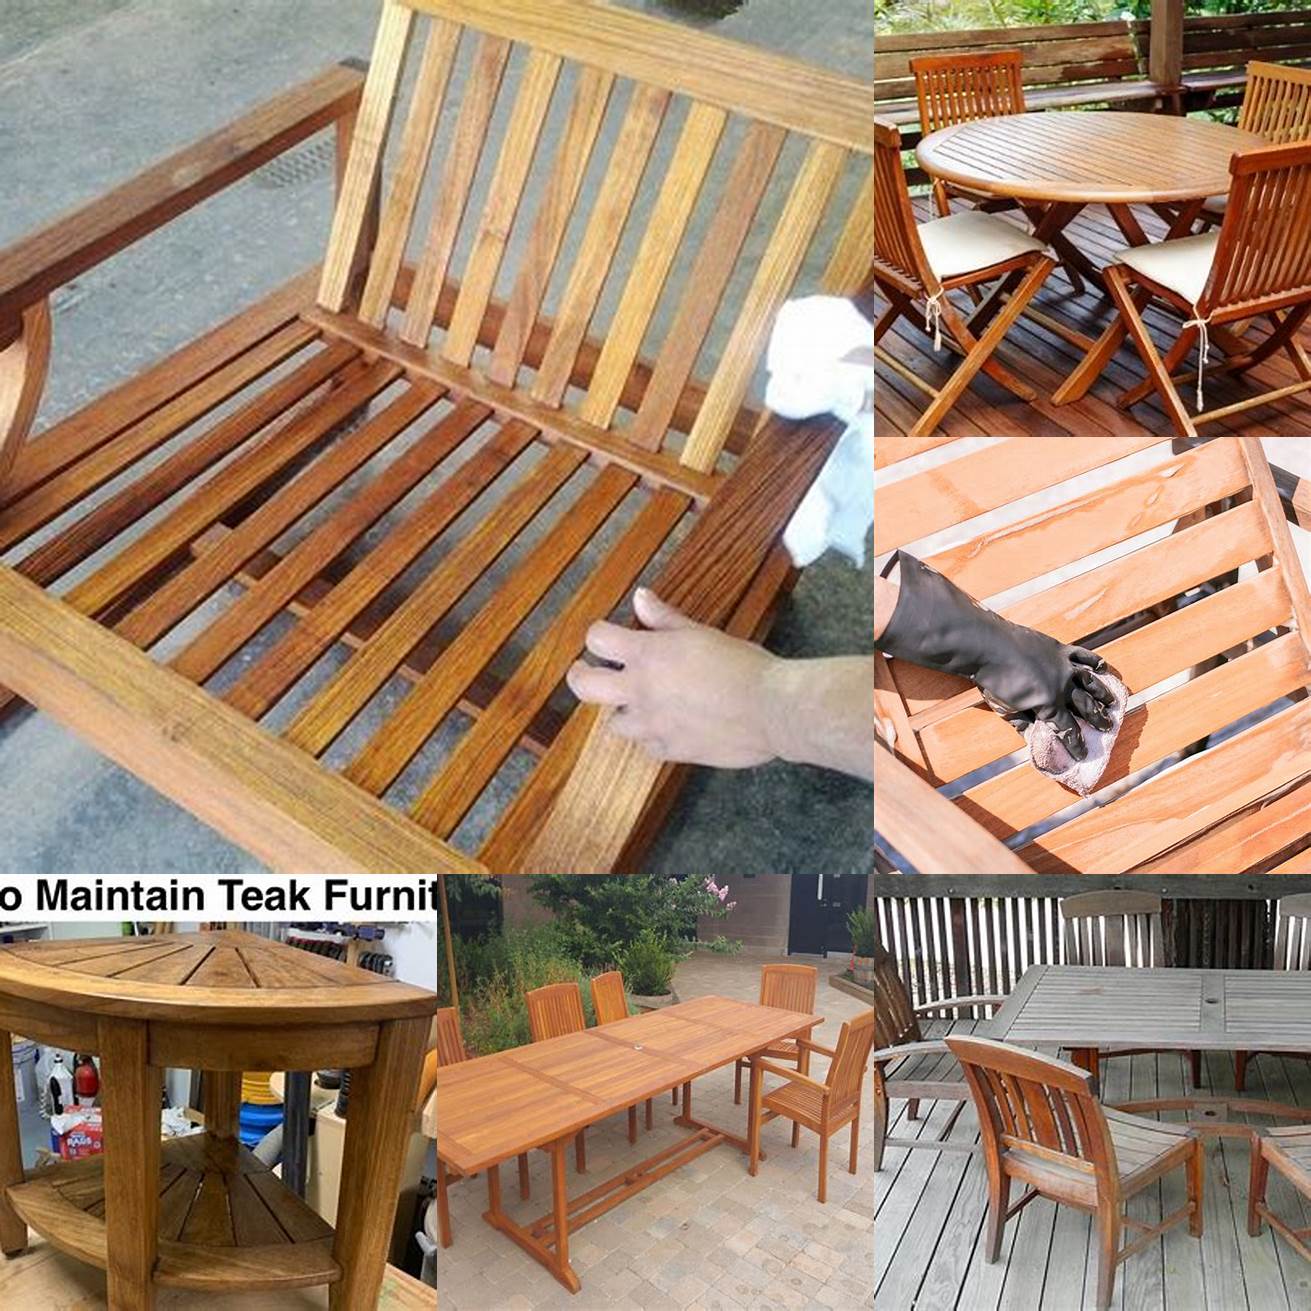 A Picture of Teak Furniture Being Maintained